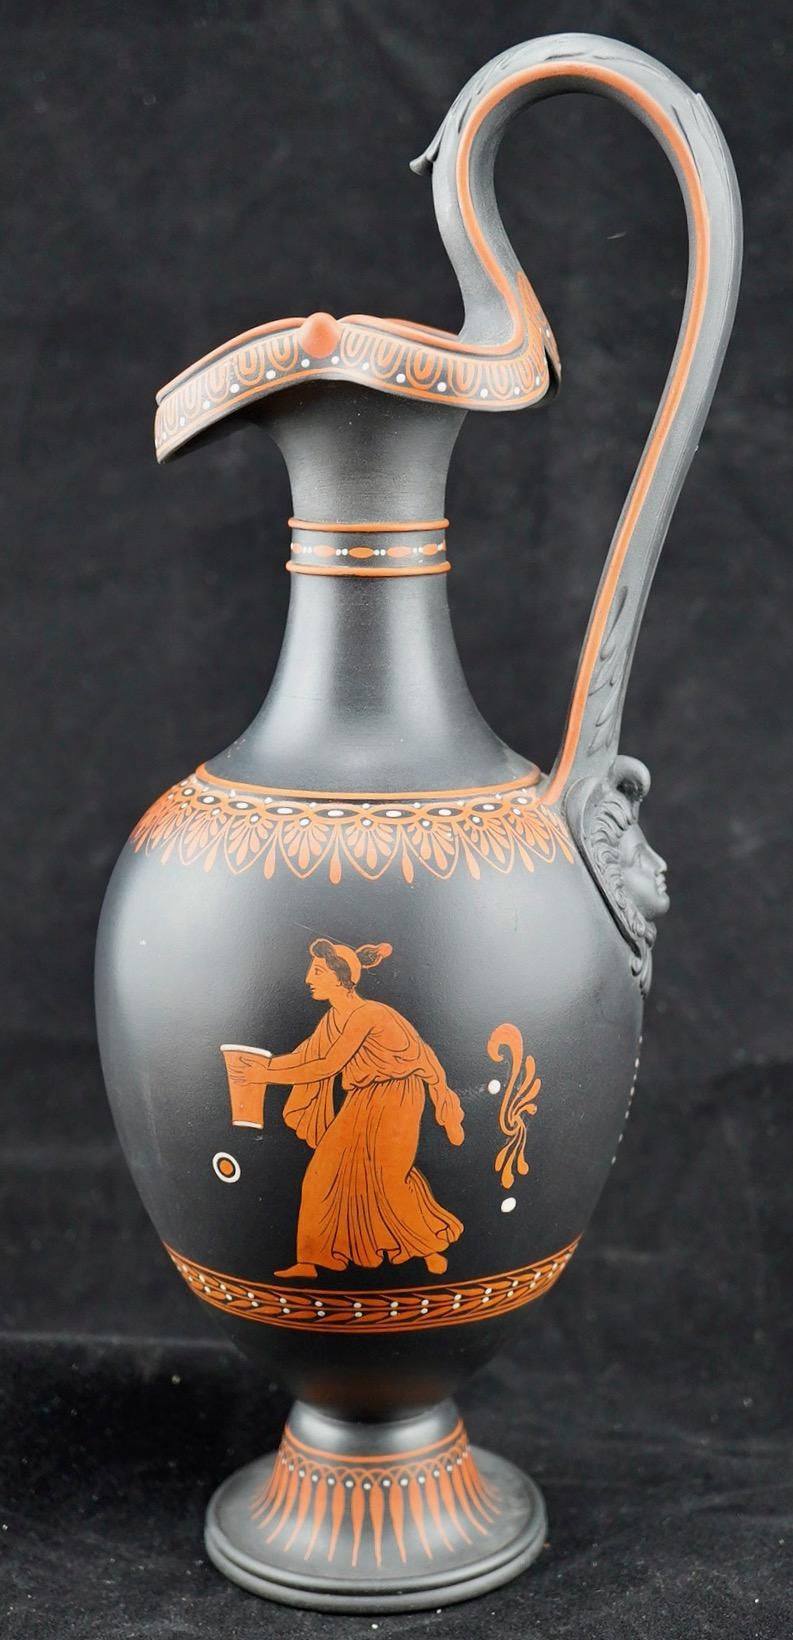 Wedgwood basalt encaustic ewer with ancient Greek inspired decoration on both sides. The shape is also inspired by a Greek wine jug, known as oenochoe. Fine detail and excellent condition.